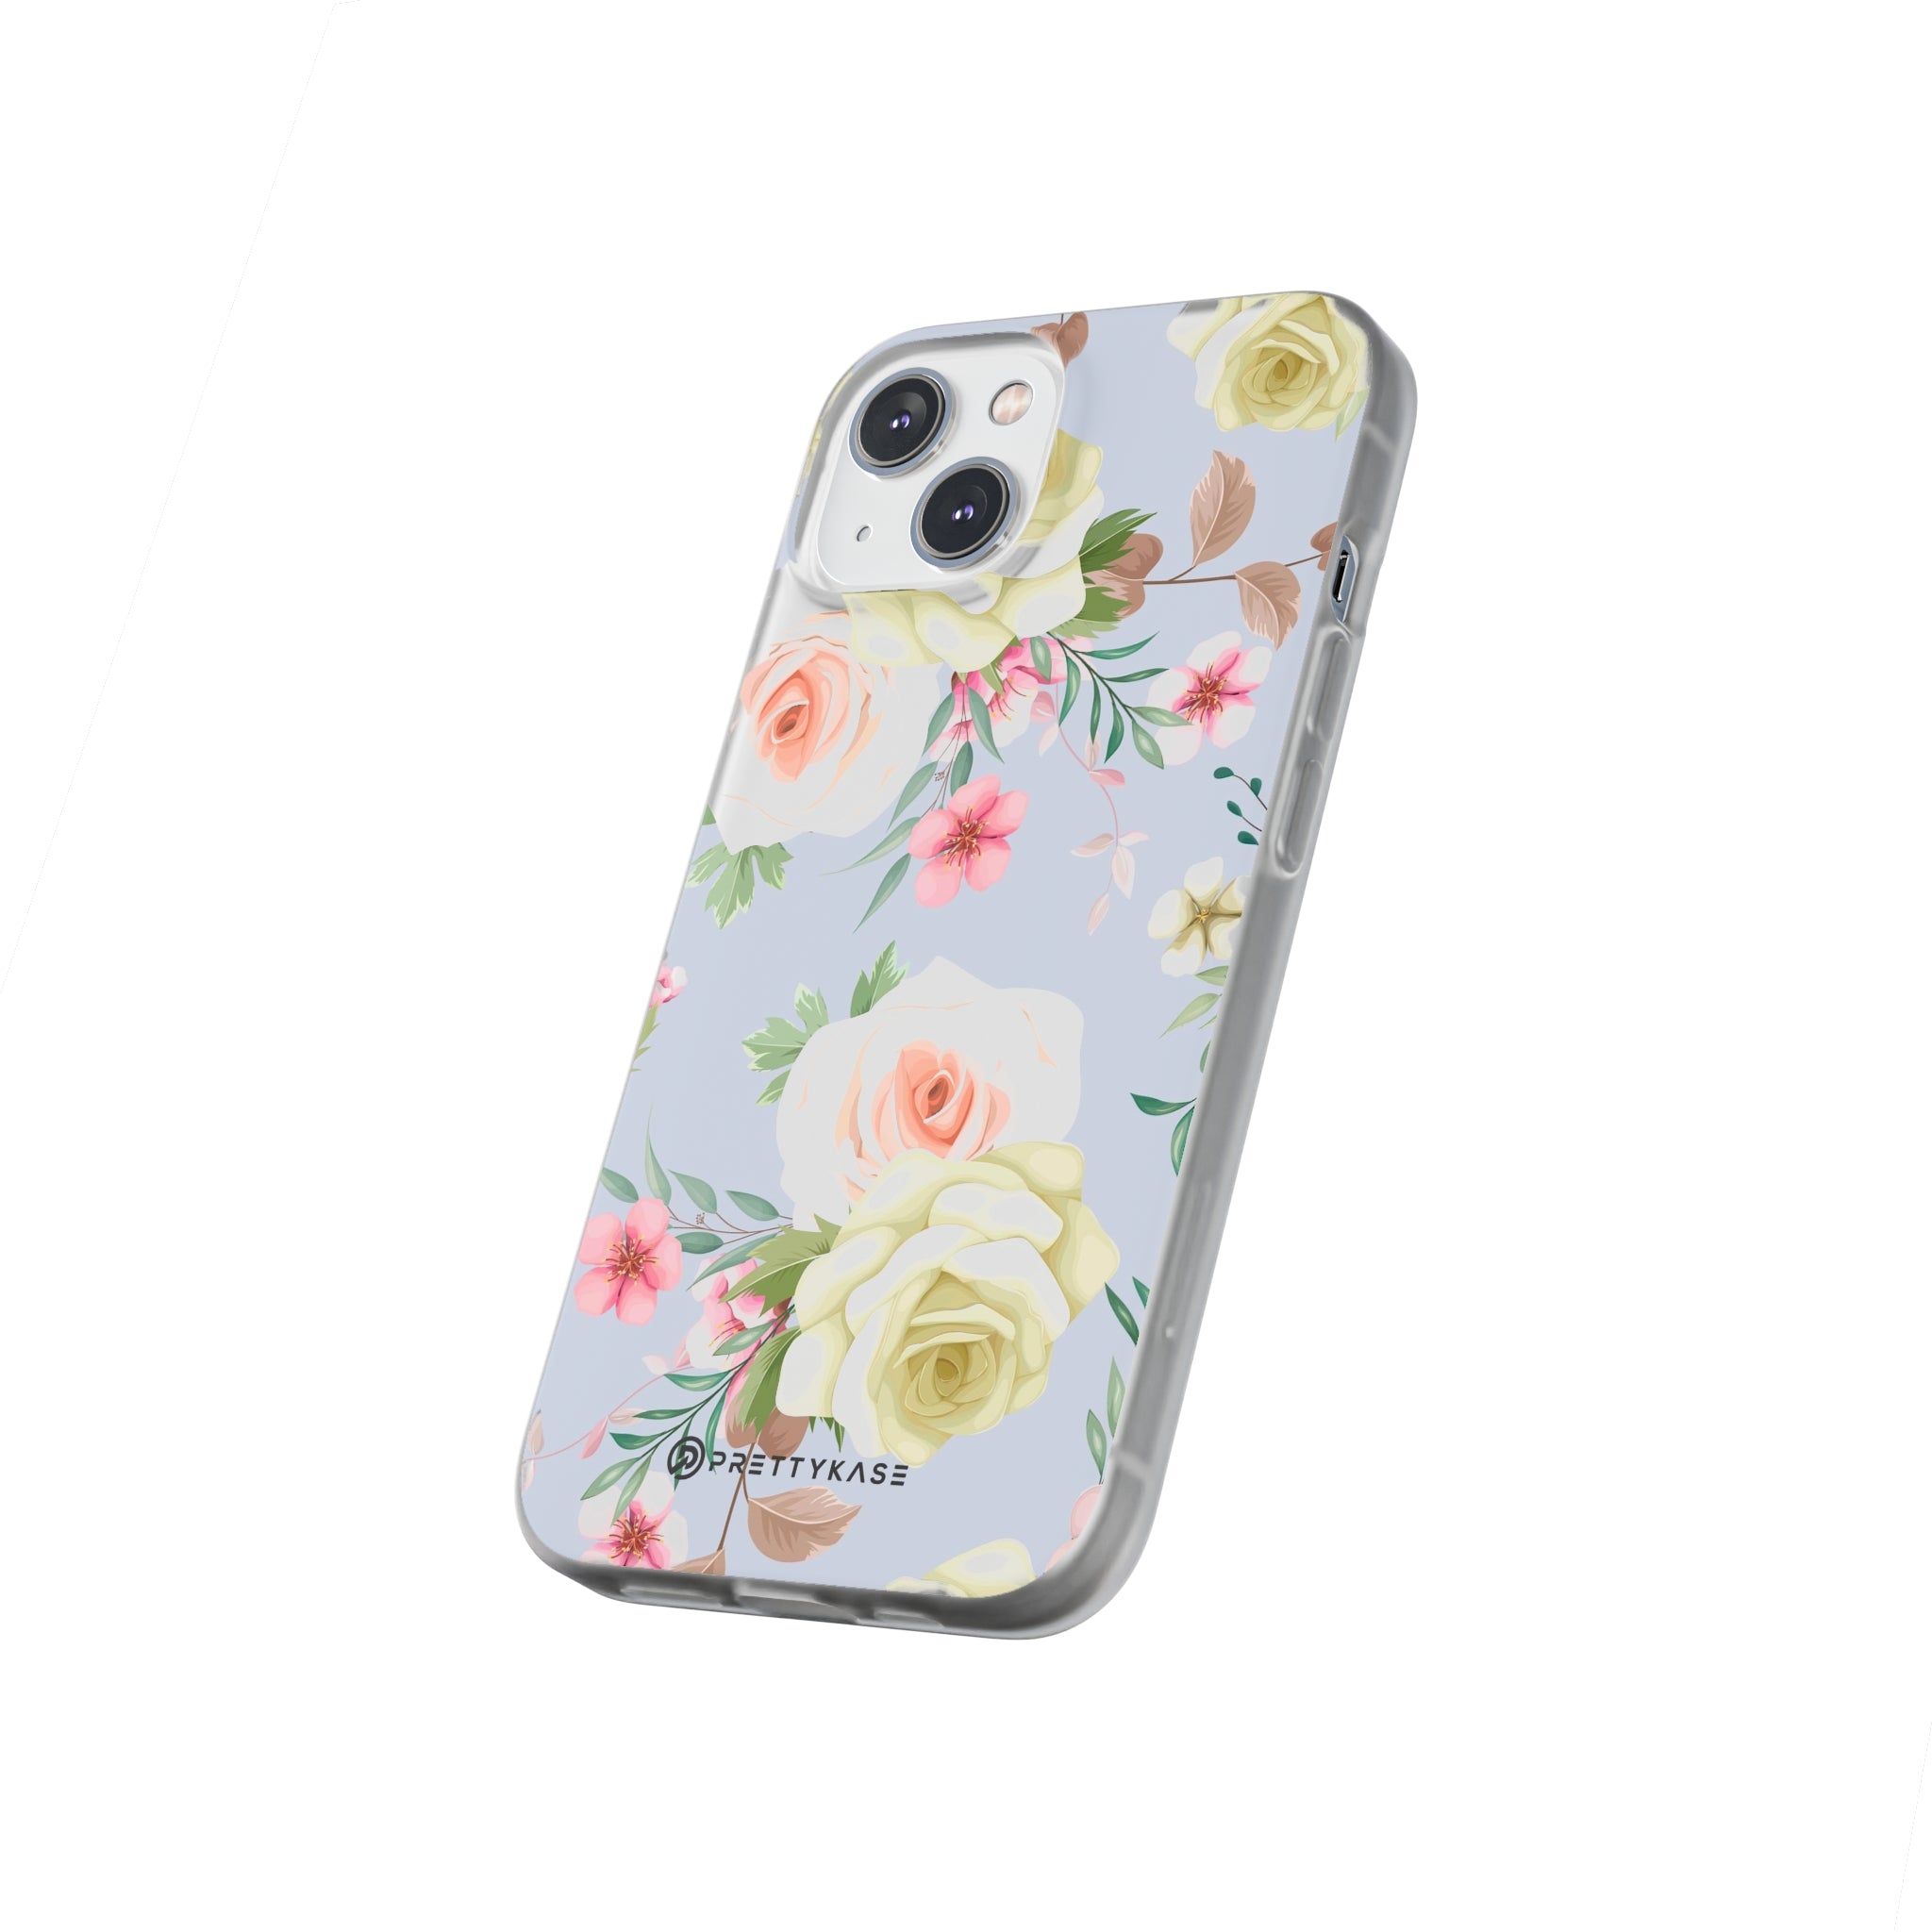 Floral Pink and Yellow Slim